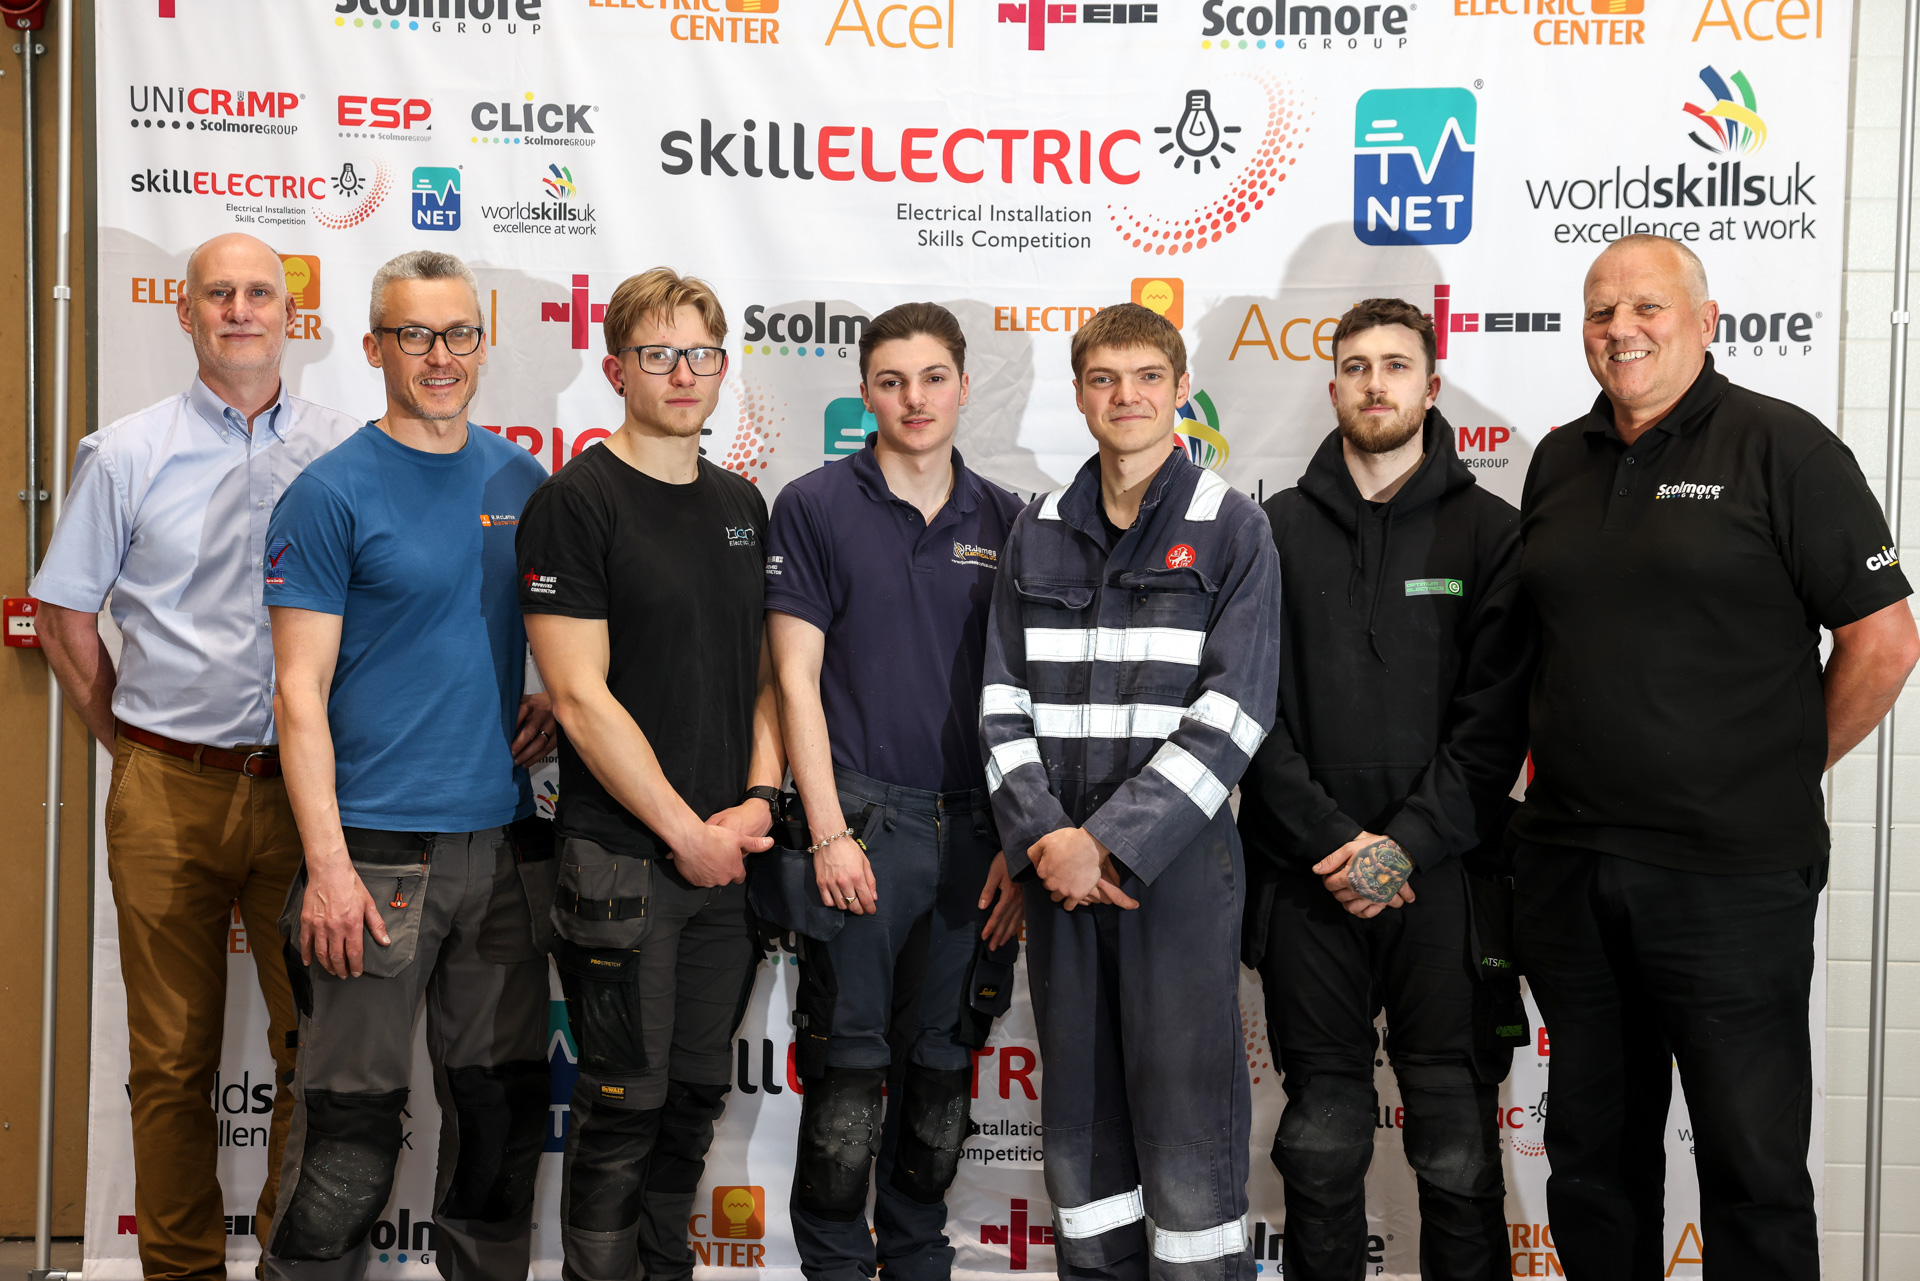 Snickers Workwear supports SkillELECTRIC